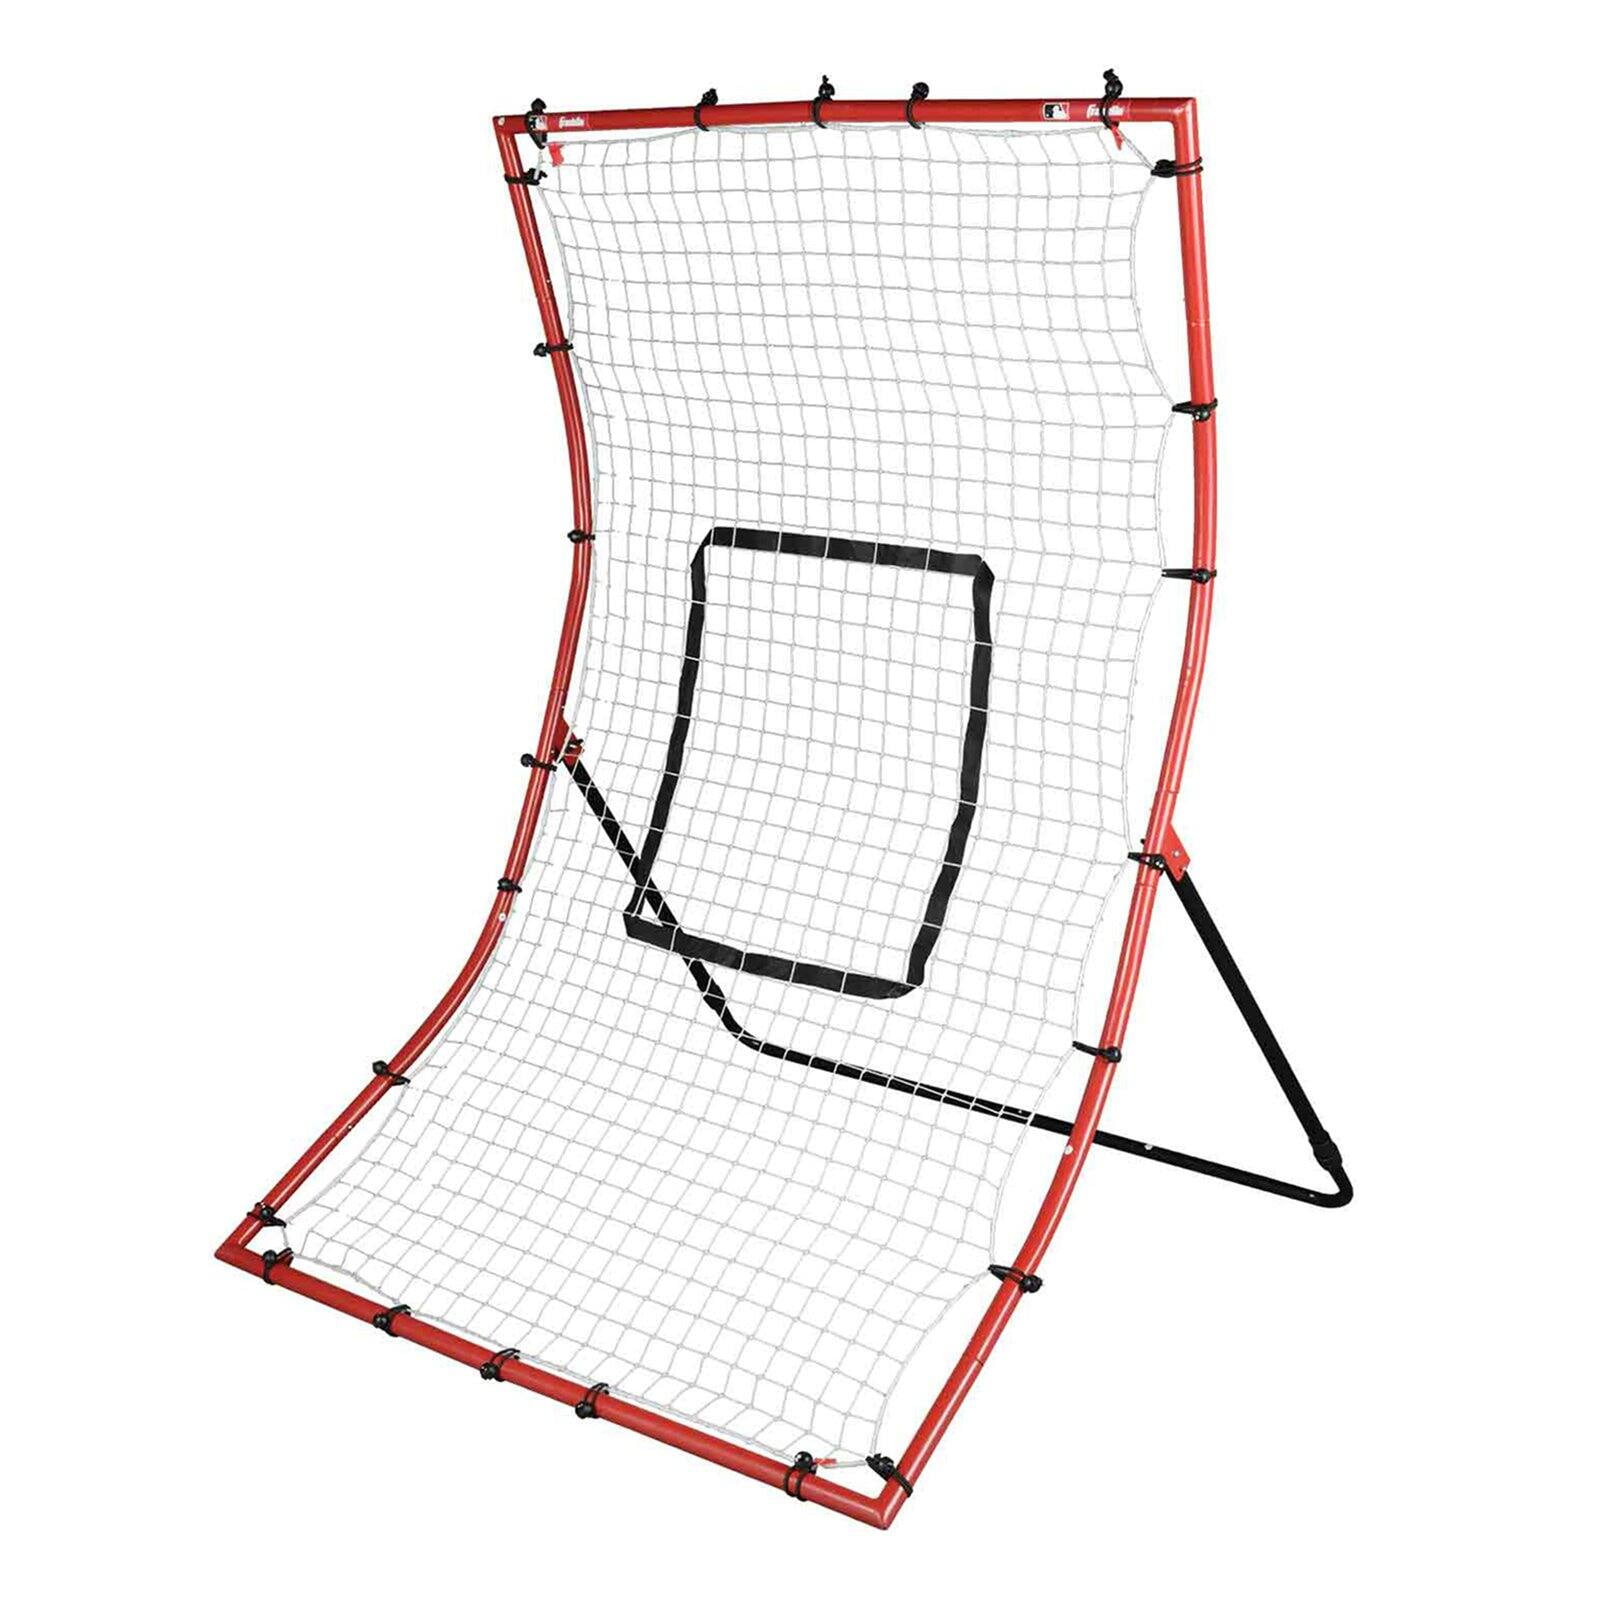 68x48in Youth Multi-Angle Ball Return Rebounder Practice Pitchback Net for Pitching Hitting Batting Throwing Powerfly Baseball Trainer Softball Pitch Back Training Equipment with Strike Zone 